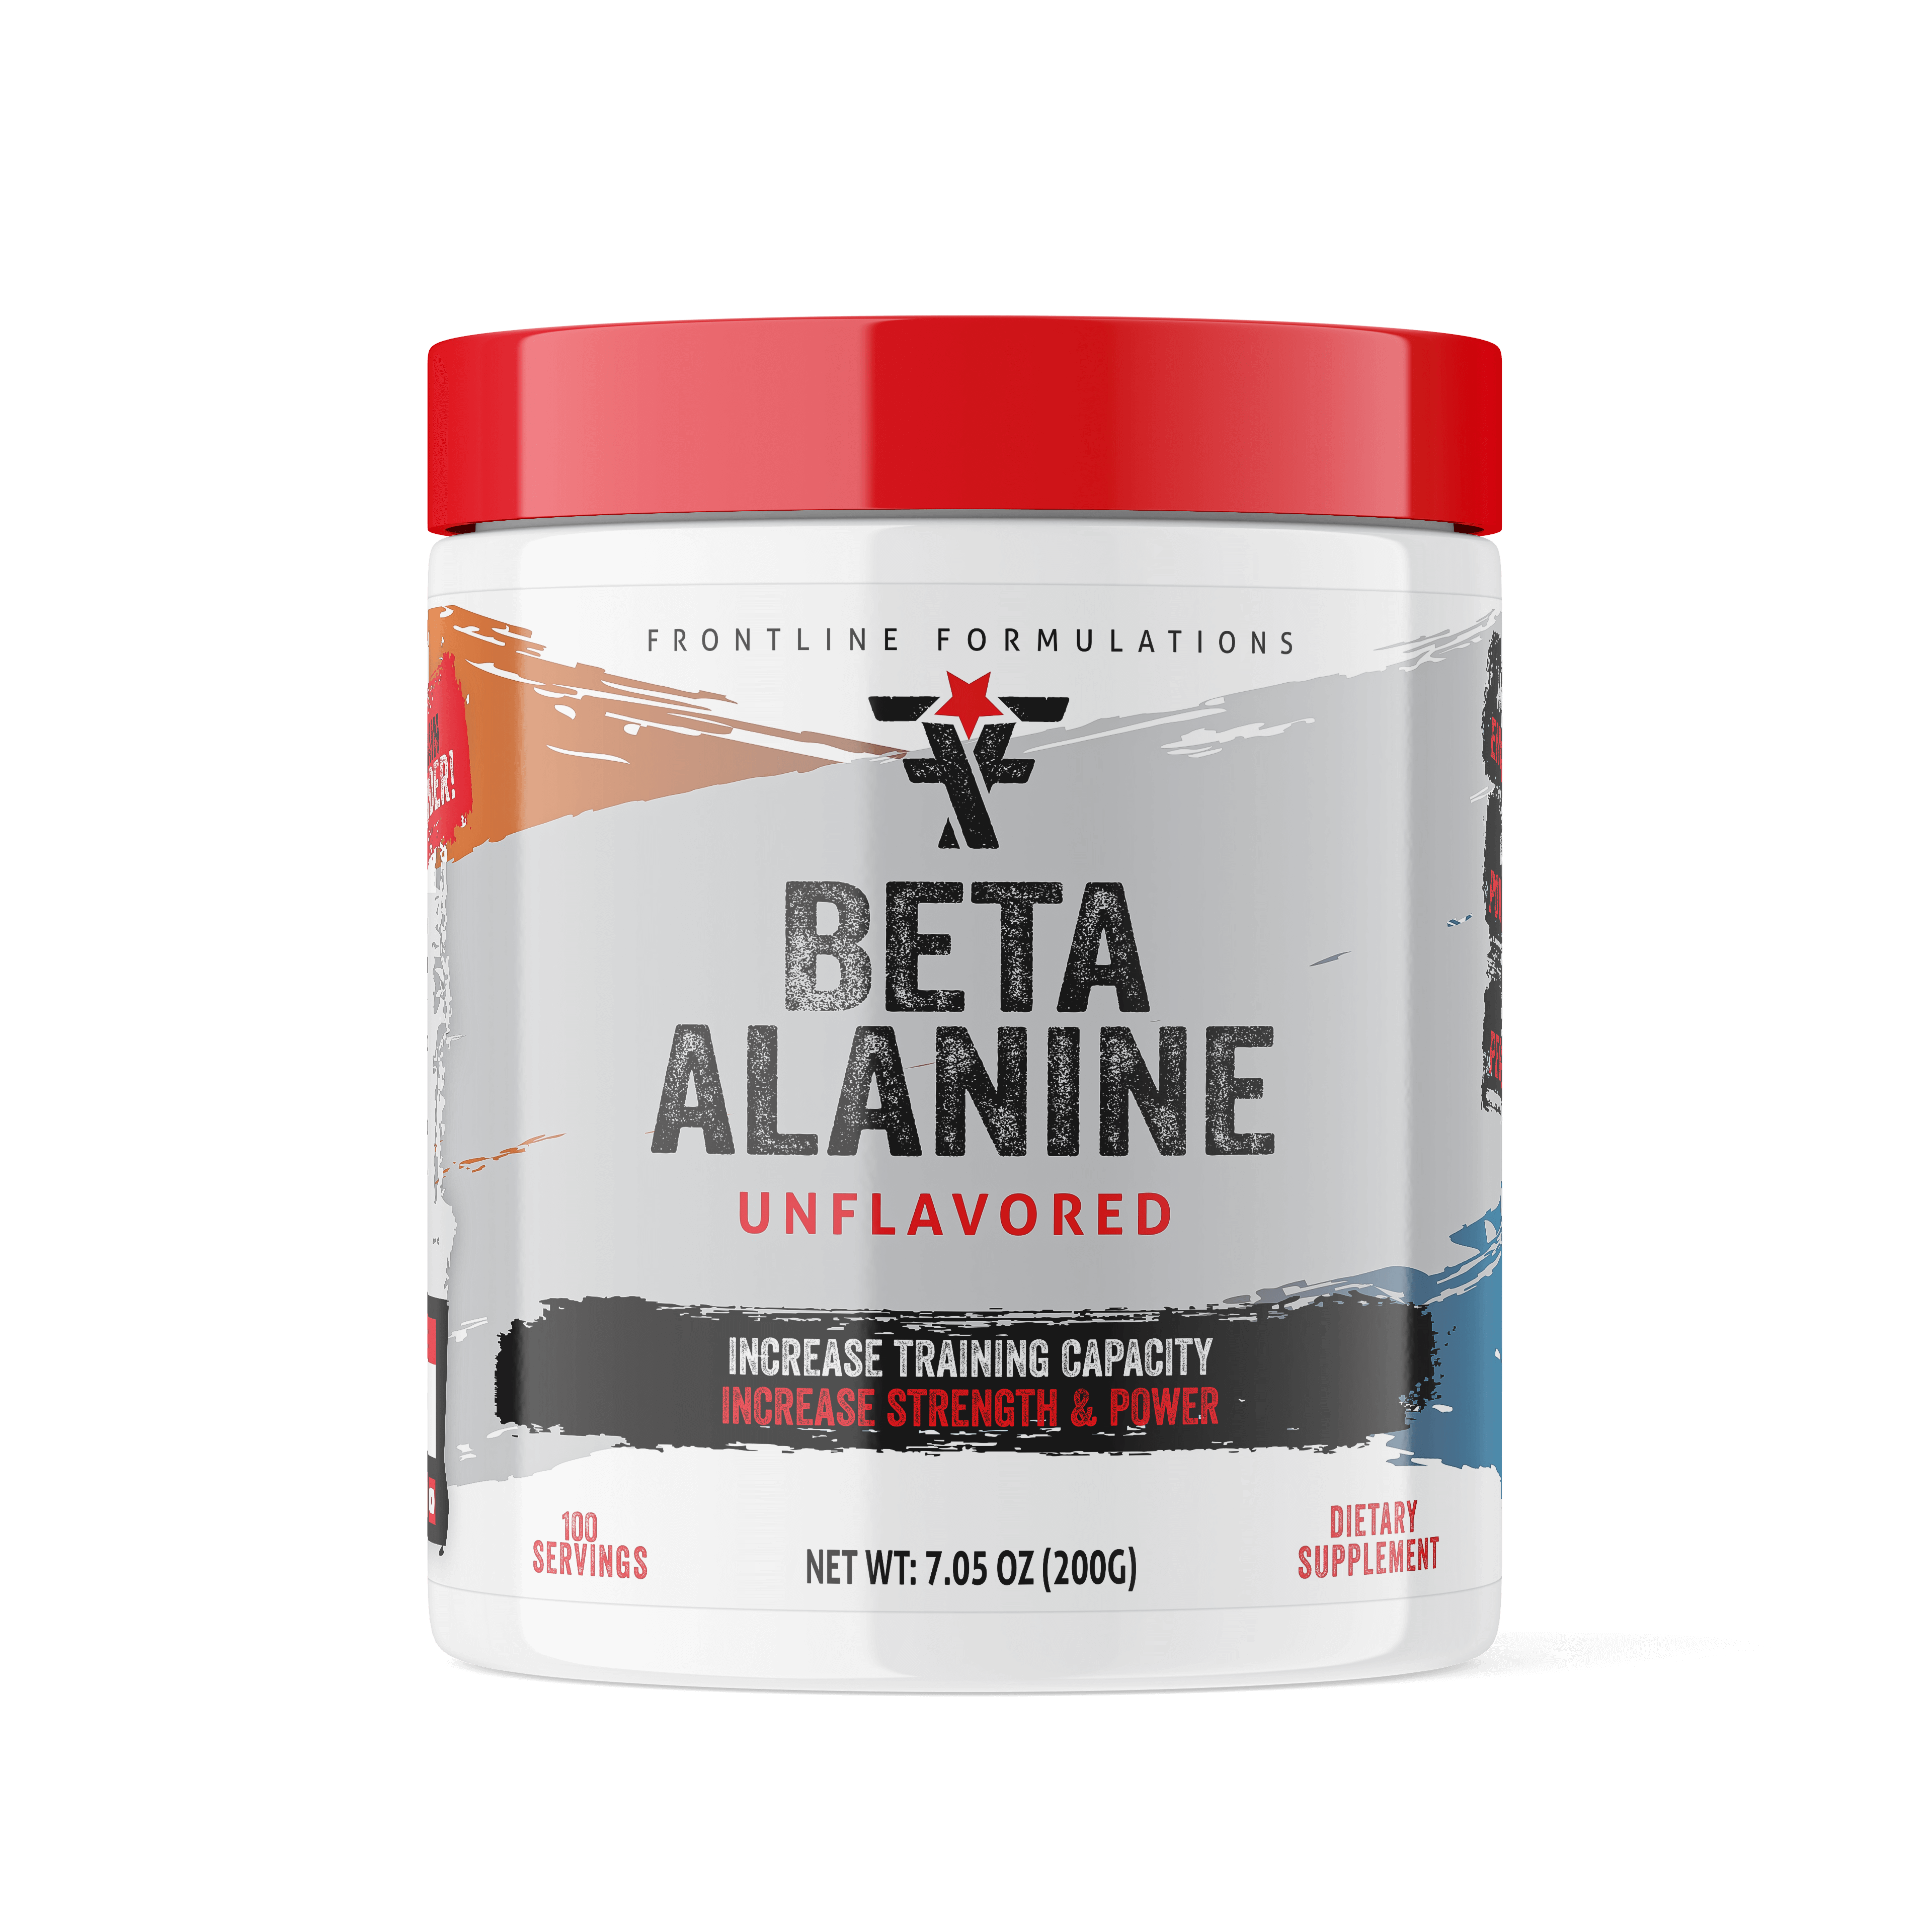 Beta Alanine Beta-alanine is a non-essential amino acid that, when combined with histidine, forms the dipeptide carnosine in the body. Carnosine plays a crucial role in buffering acid in muscles, particularly during high-intensity exercise. Here are some